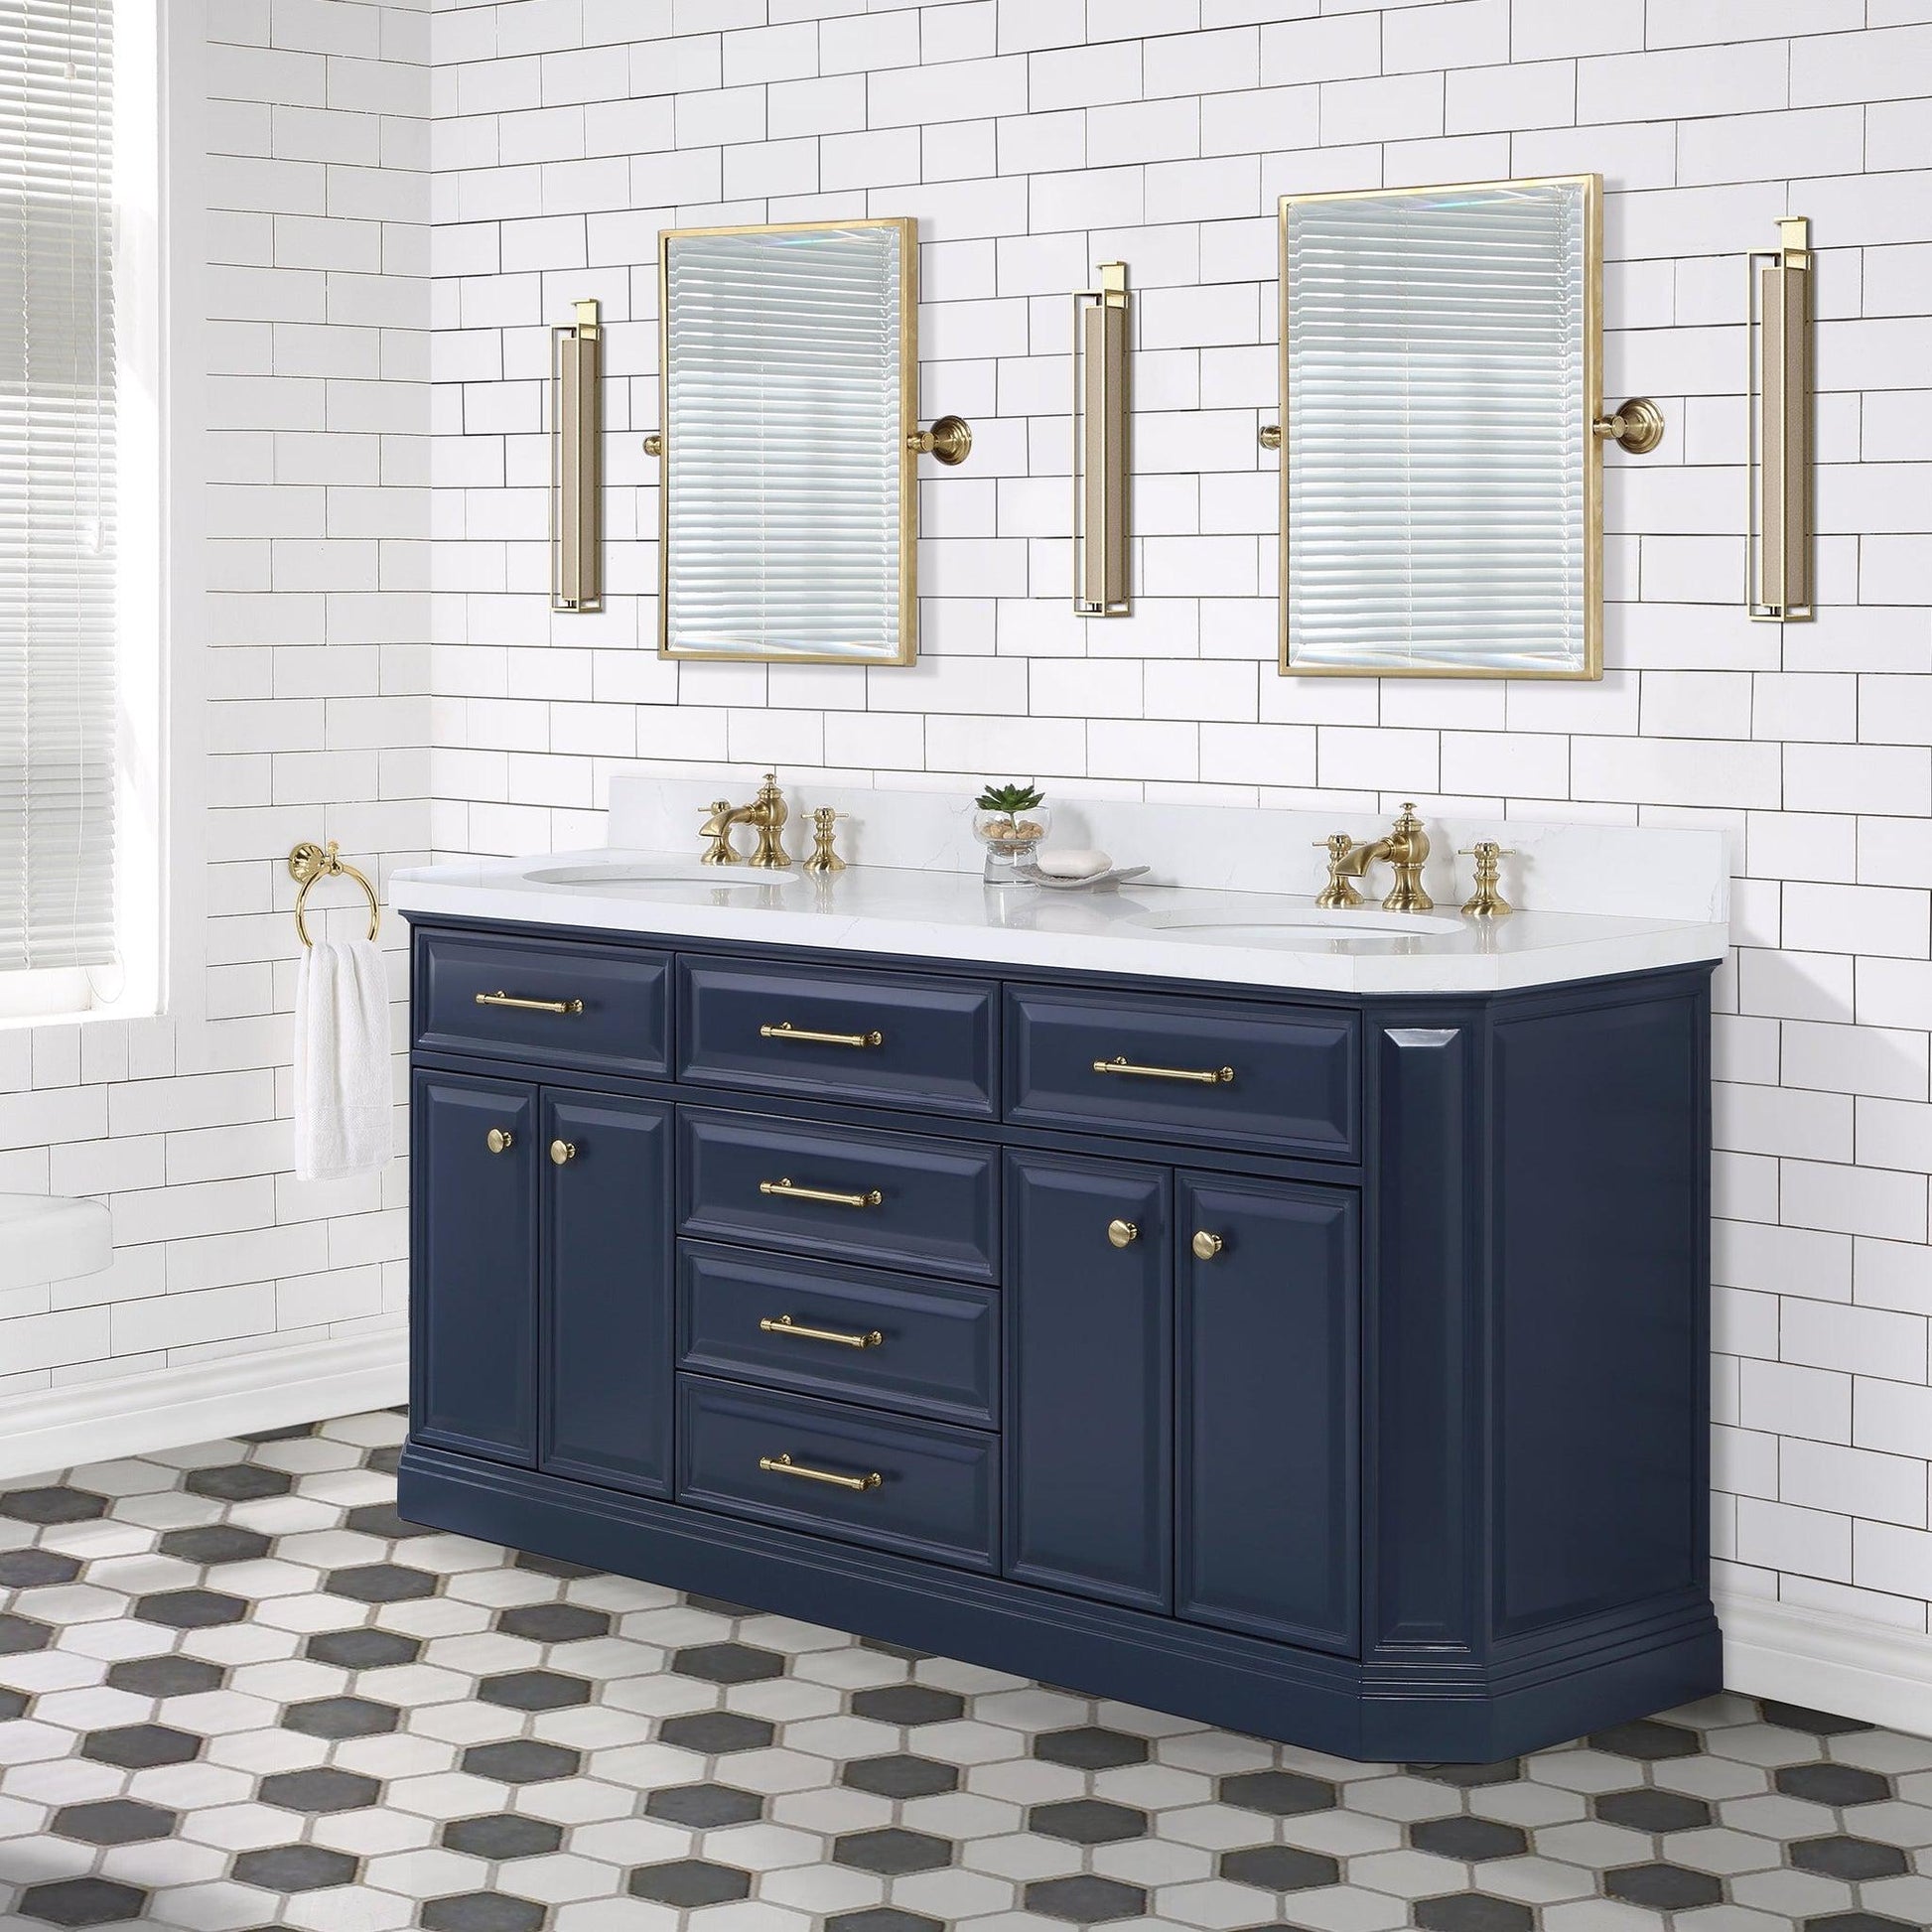 Water Creation Palace 72" Double Sink White Quartz Countertop Vanity in Monarch Blue with Waterfall Faucets and Mirrors